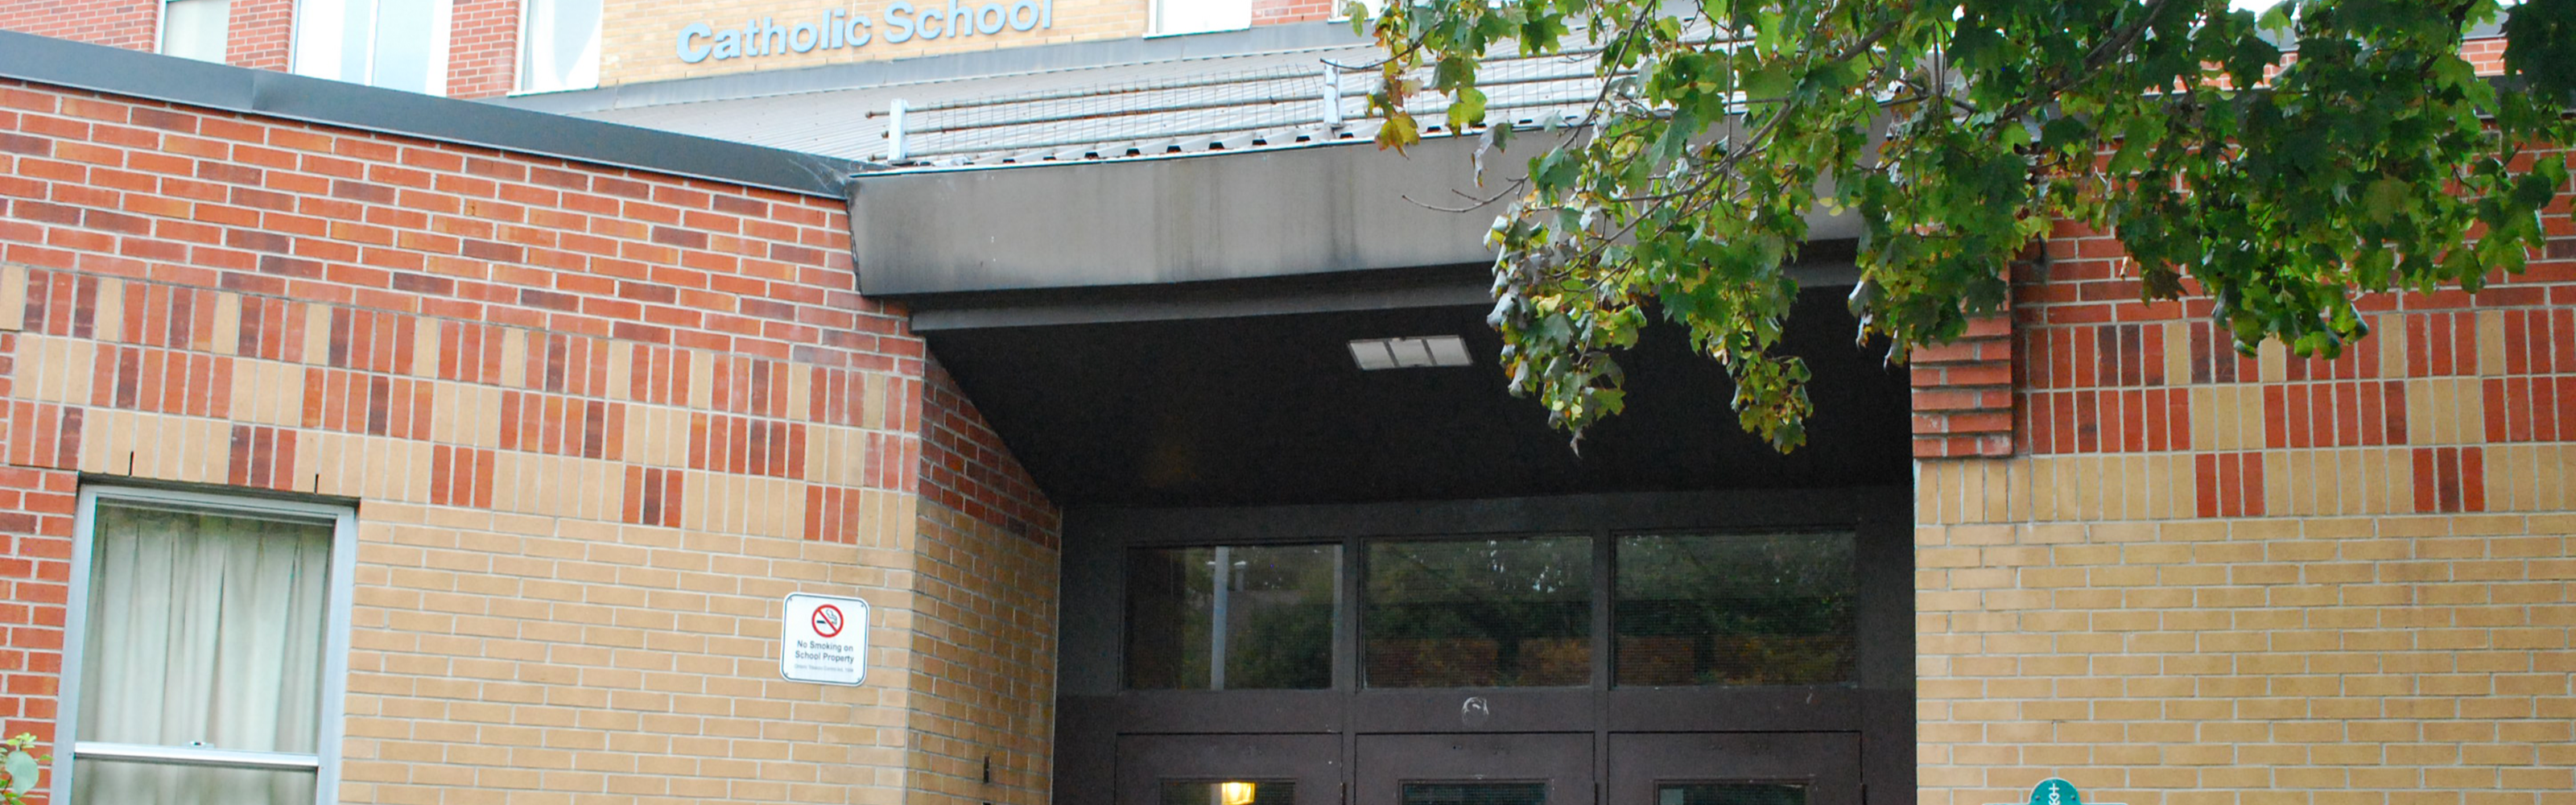 The front of the St. Bruno / St. Raymond Catholic School building.